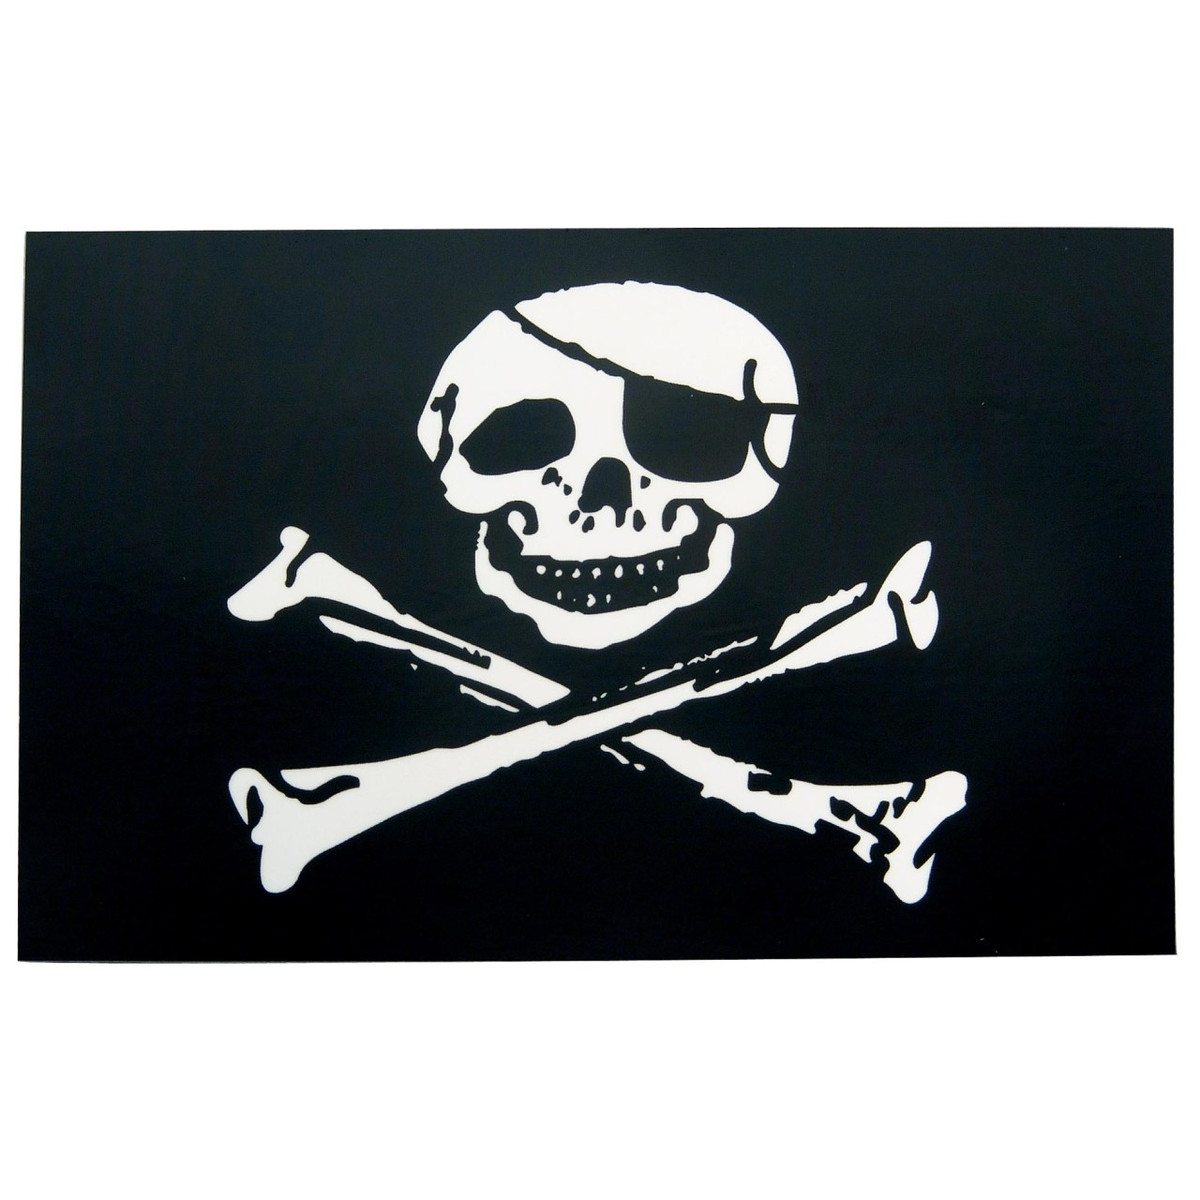 Pirate Flag Sticker - Jolly Roger Decal